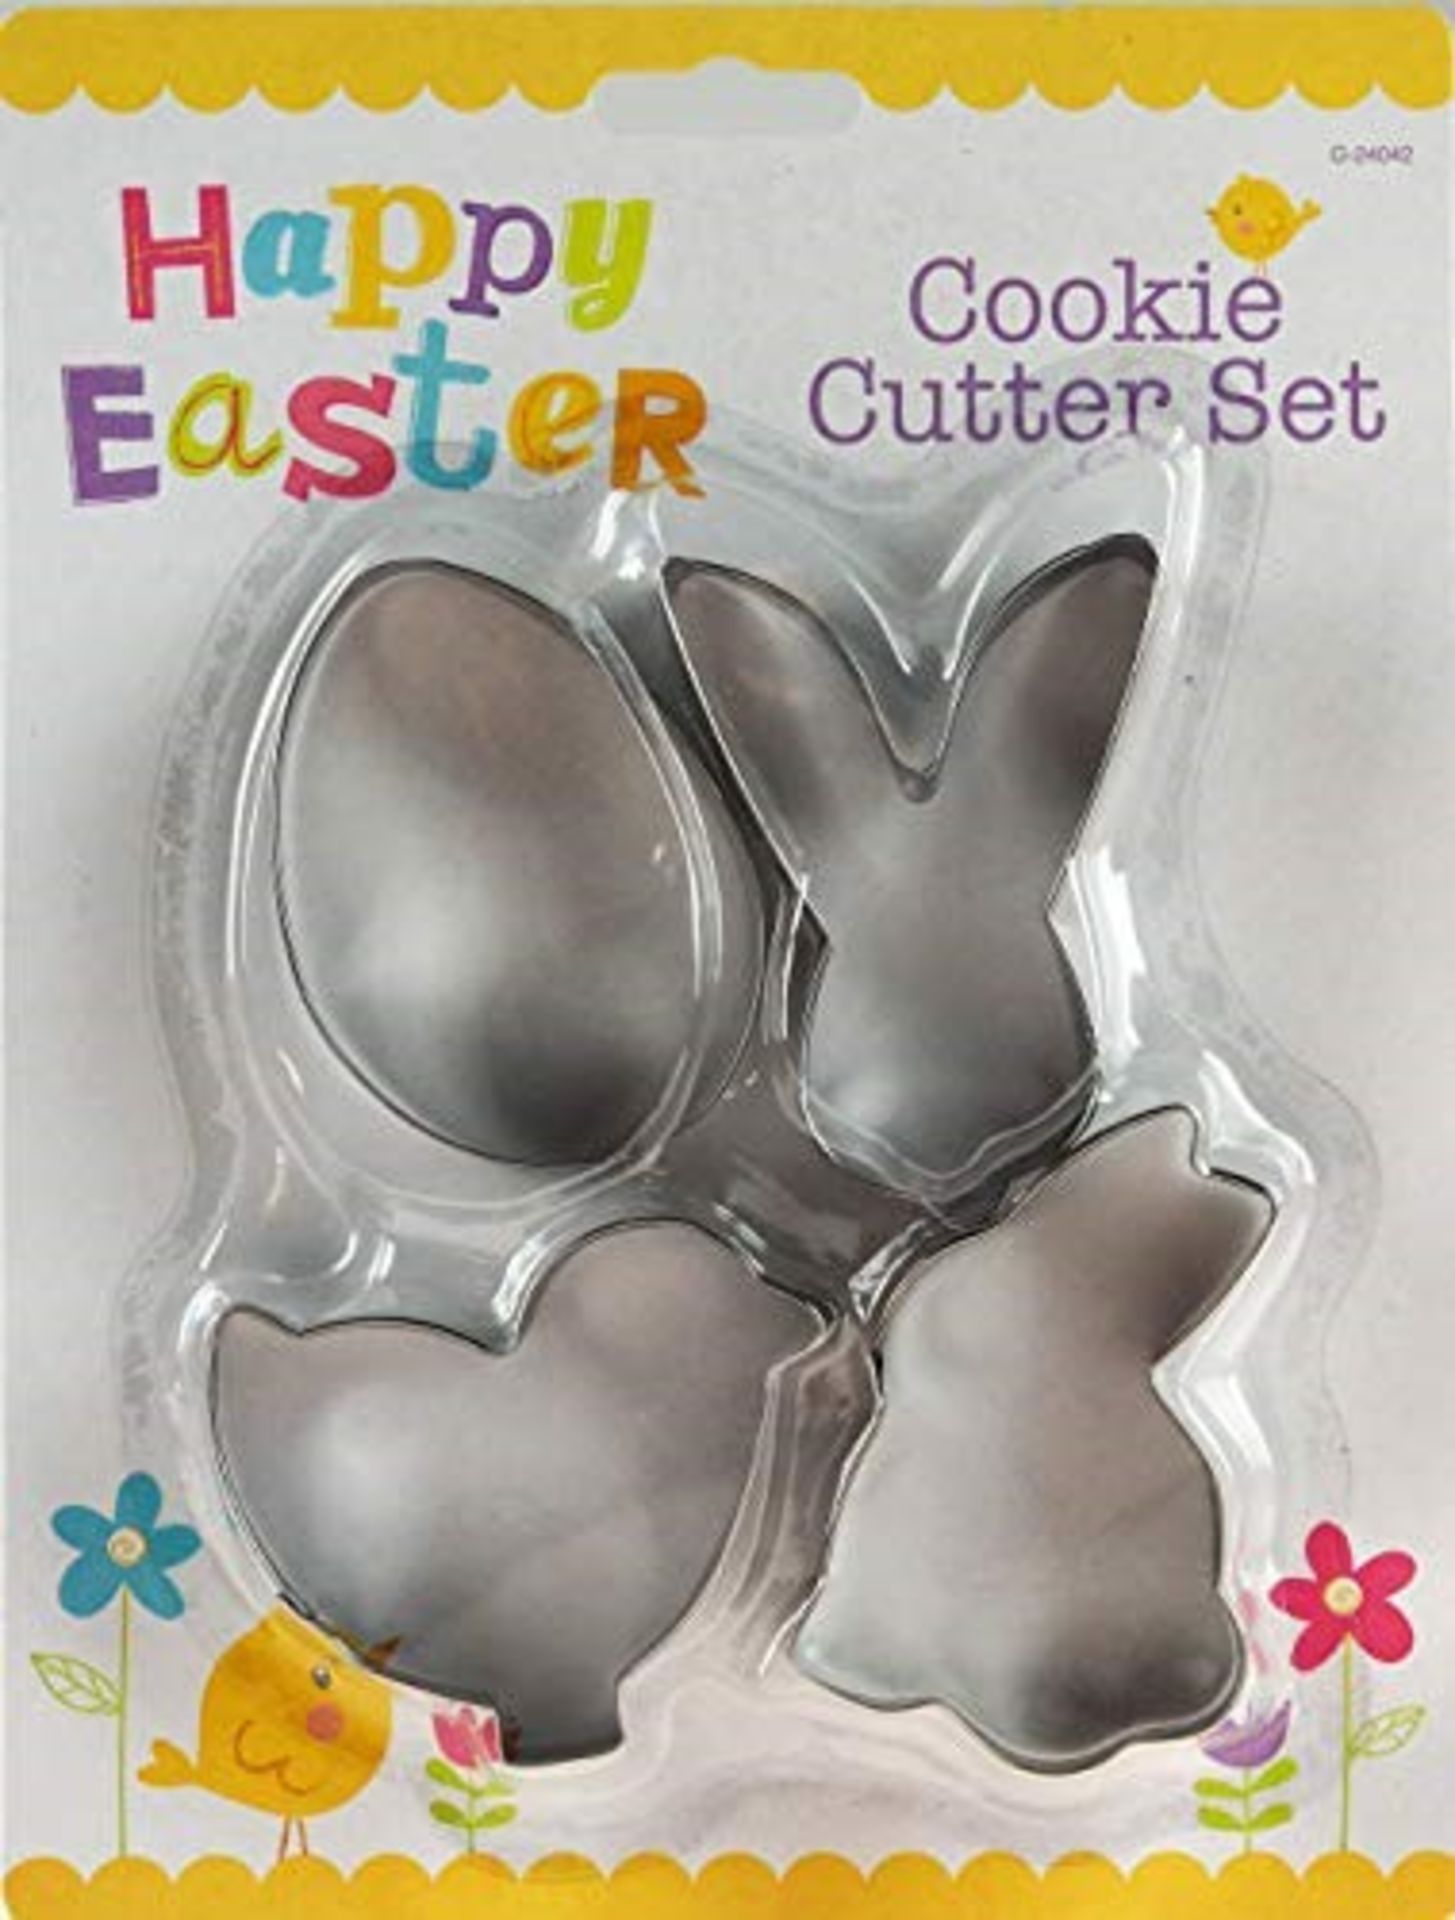 ITP G24042 Easter Steel Cookie Cutters Mould Cake Biscuit Baking Tool Decoration Set 4 - Image 3 of 4